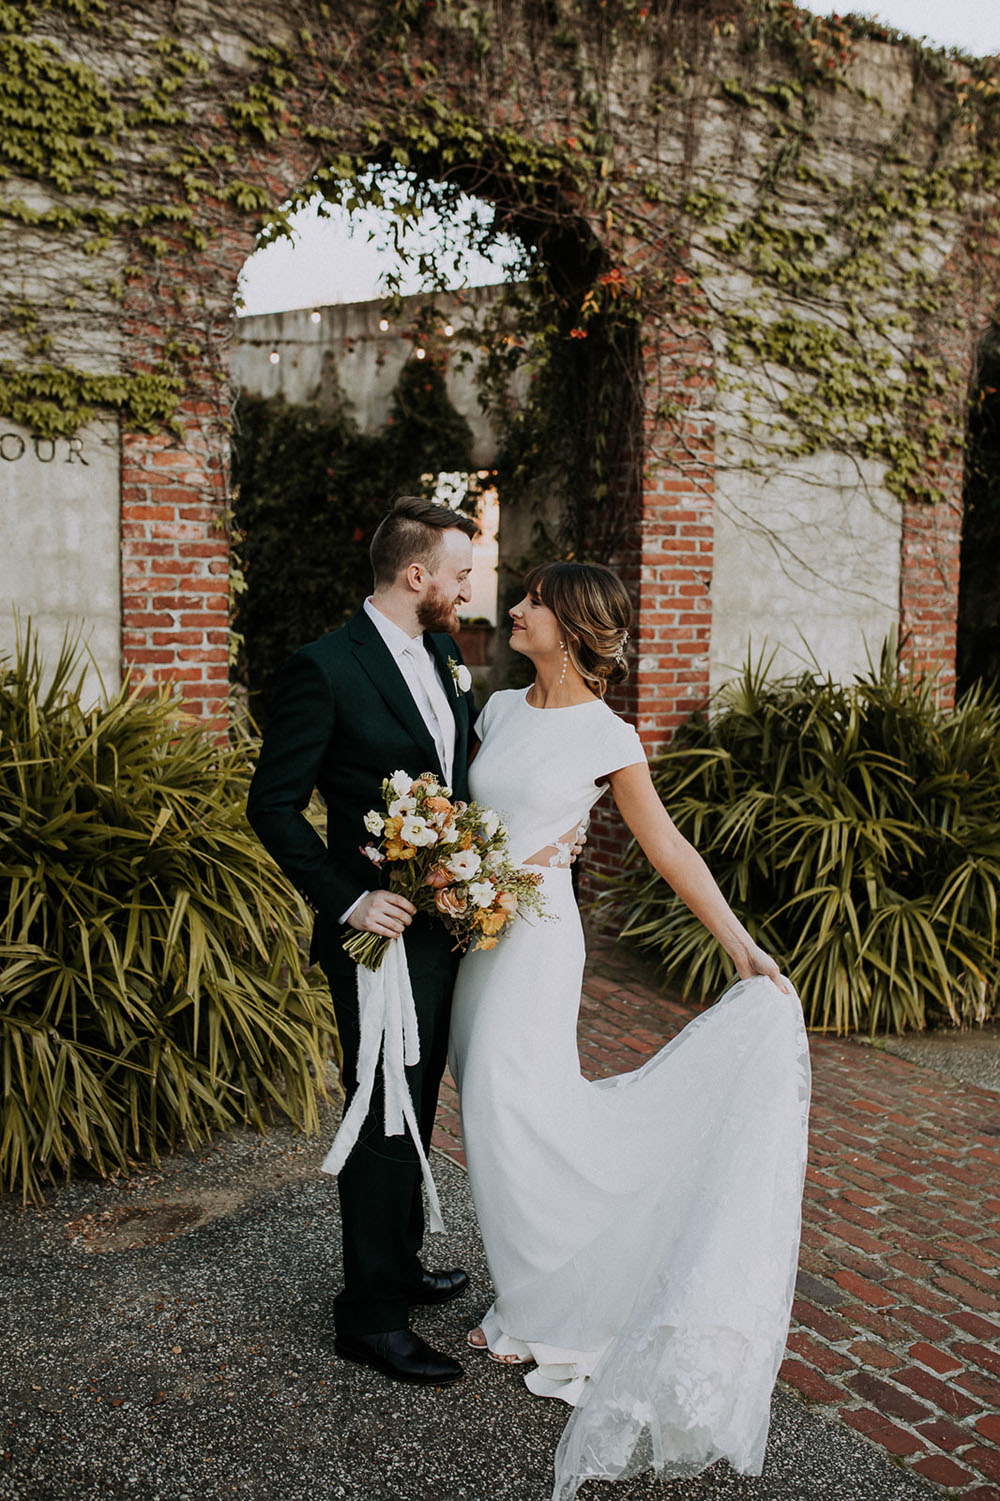 Romantic wedding venues in Atlanta / photo by Lupins and Lava